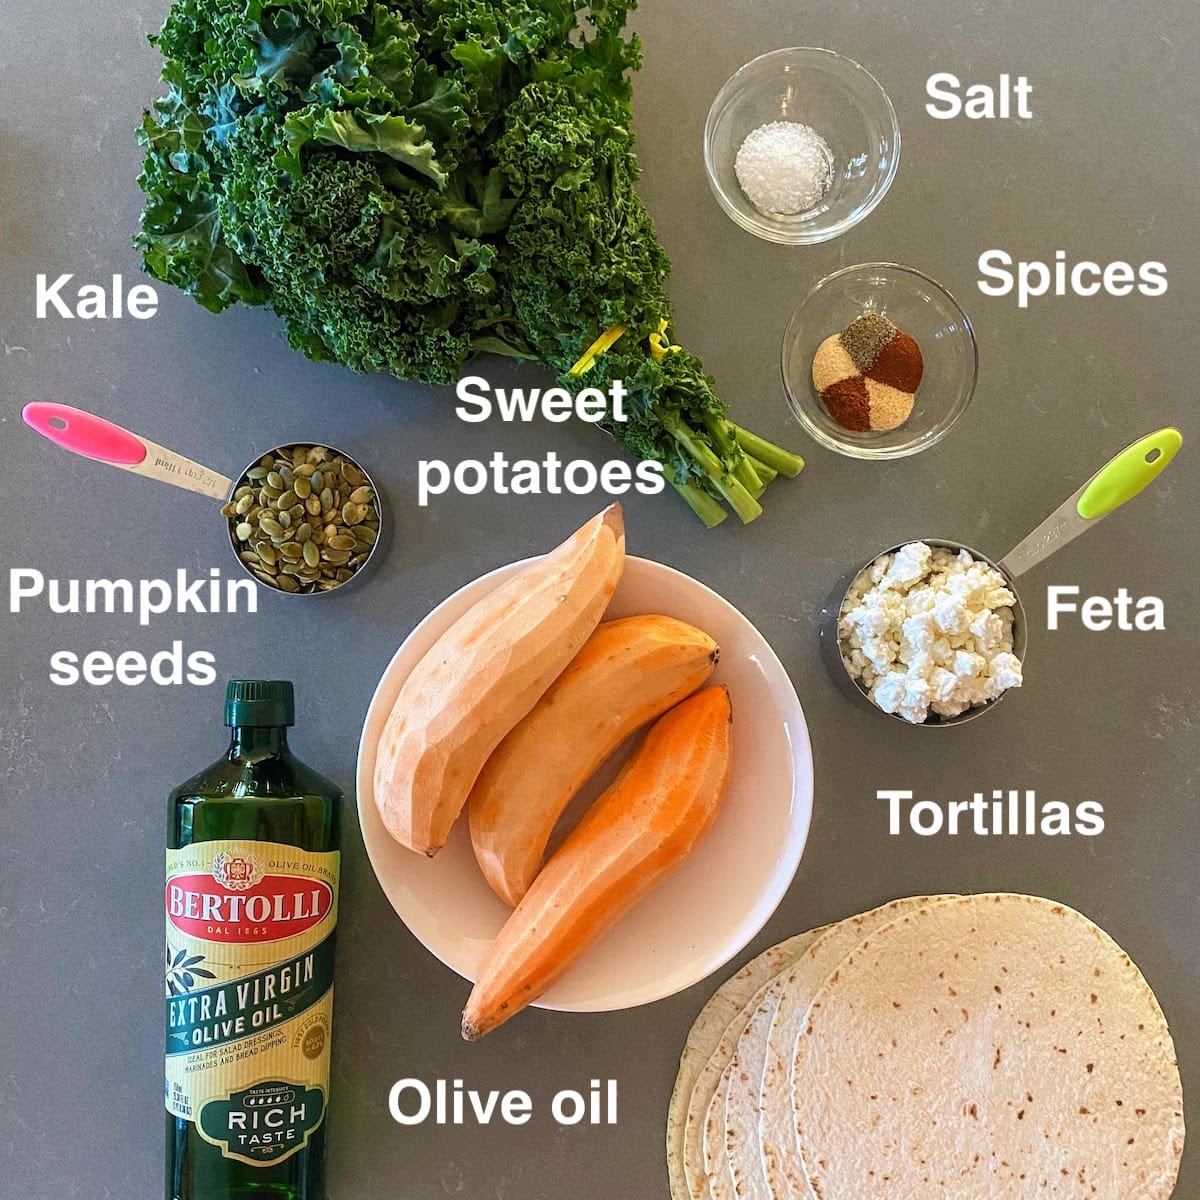 sweet potatoes, kale, pumpkin seeds, feta and other ingredients to make a wrap